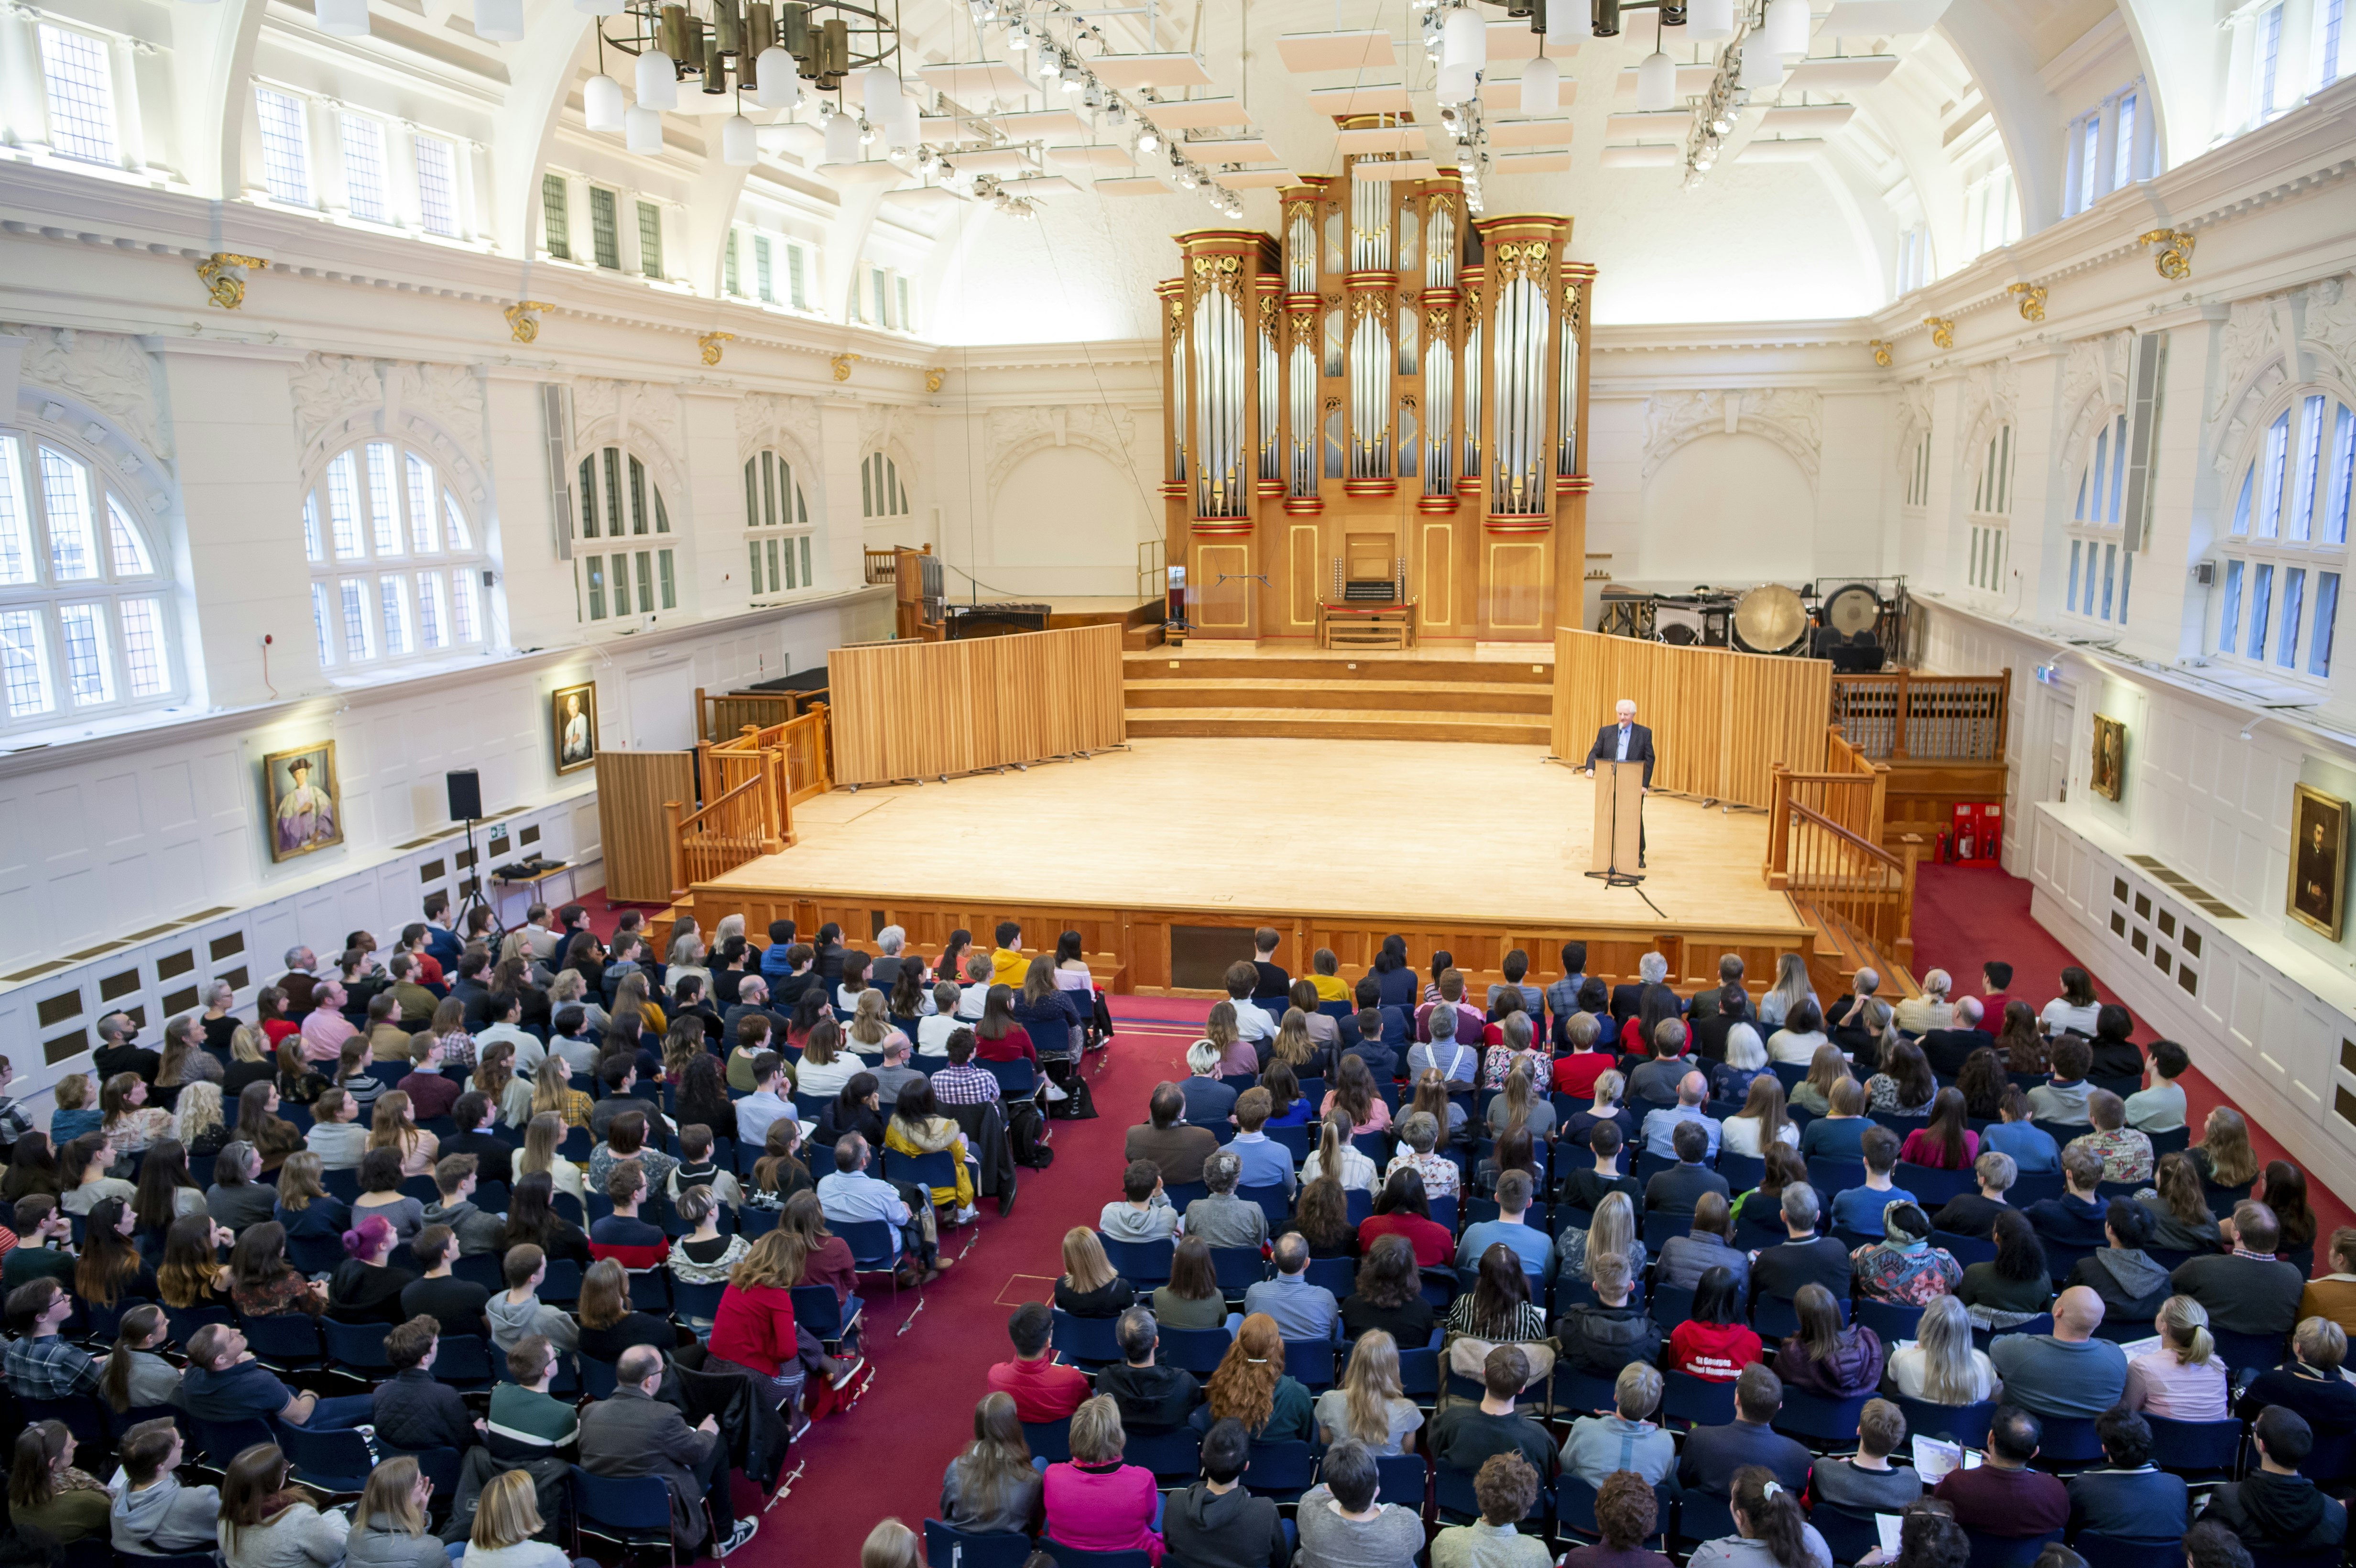 The Royal College of Music - Amaryllis Fleming Concert Hall image 5